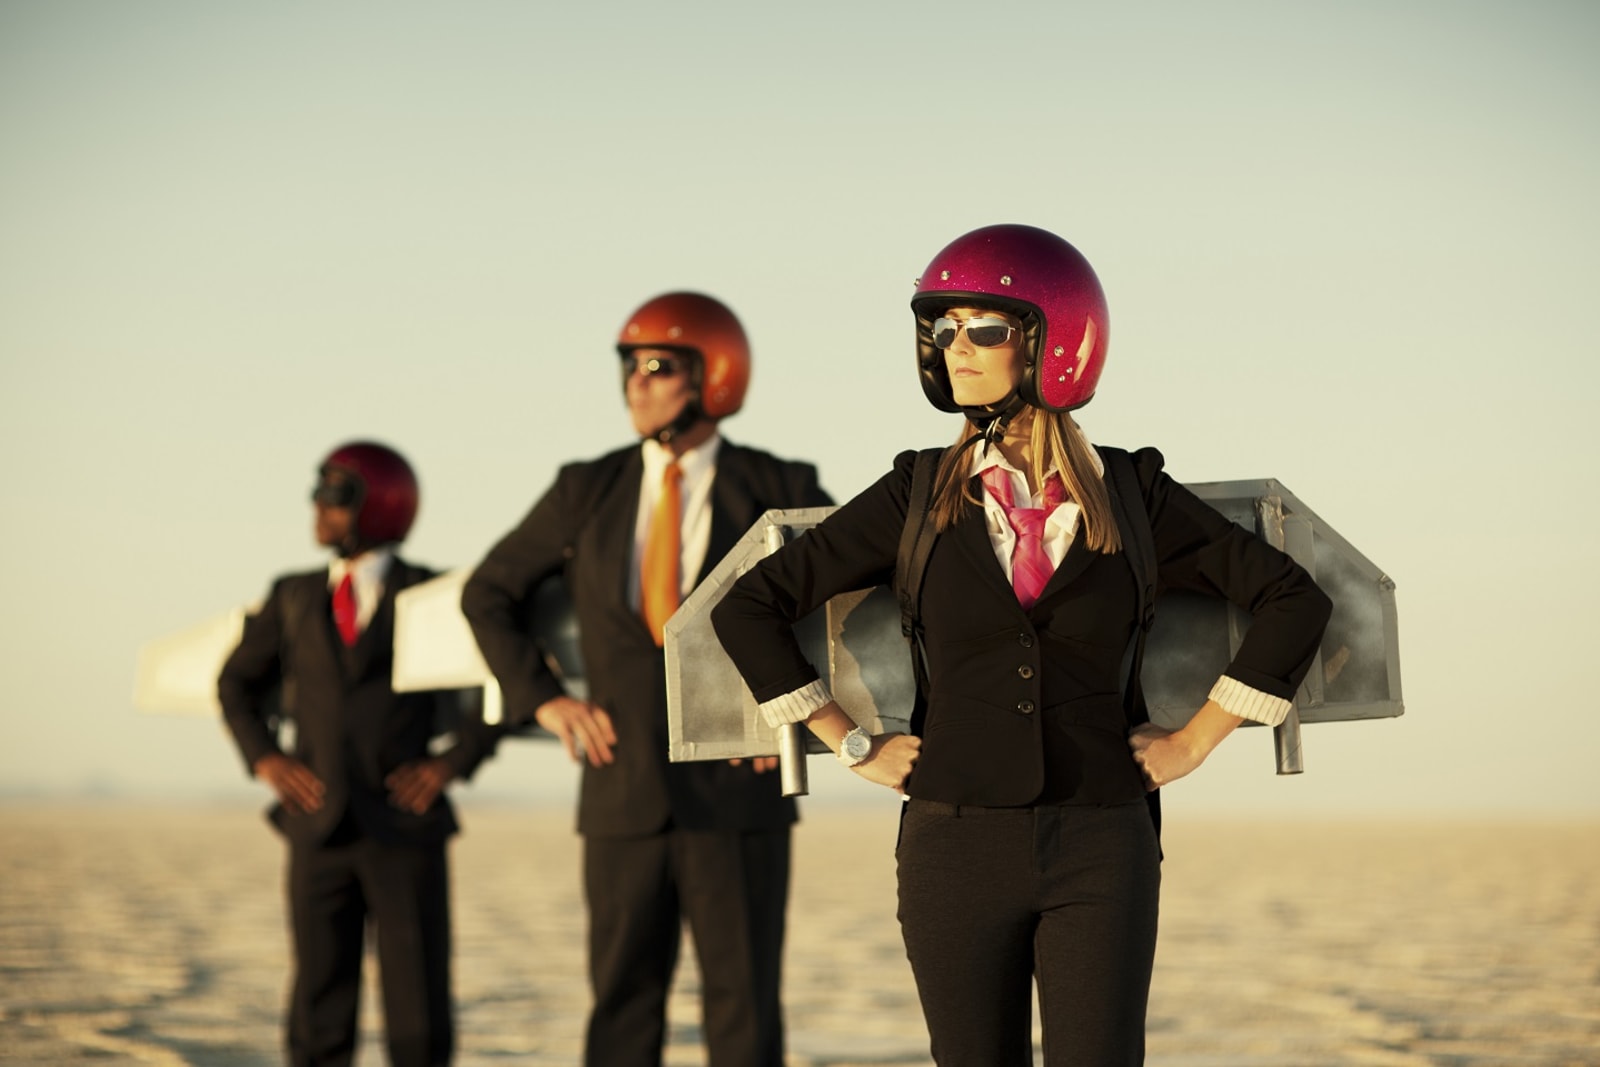 3 people in business suits wearing red crash helmets and costume space wings, in a desert